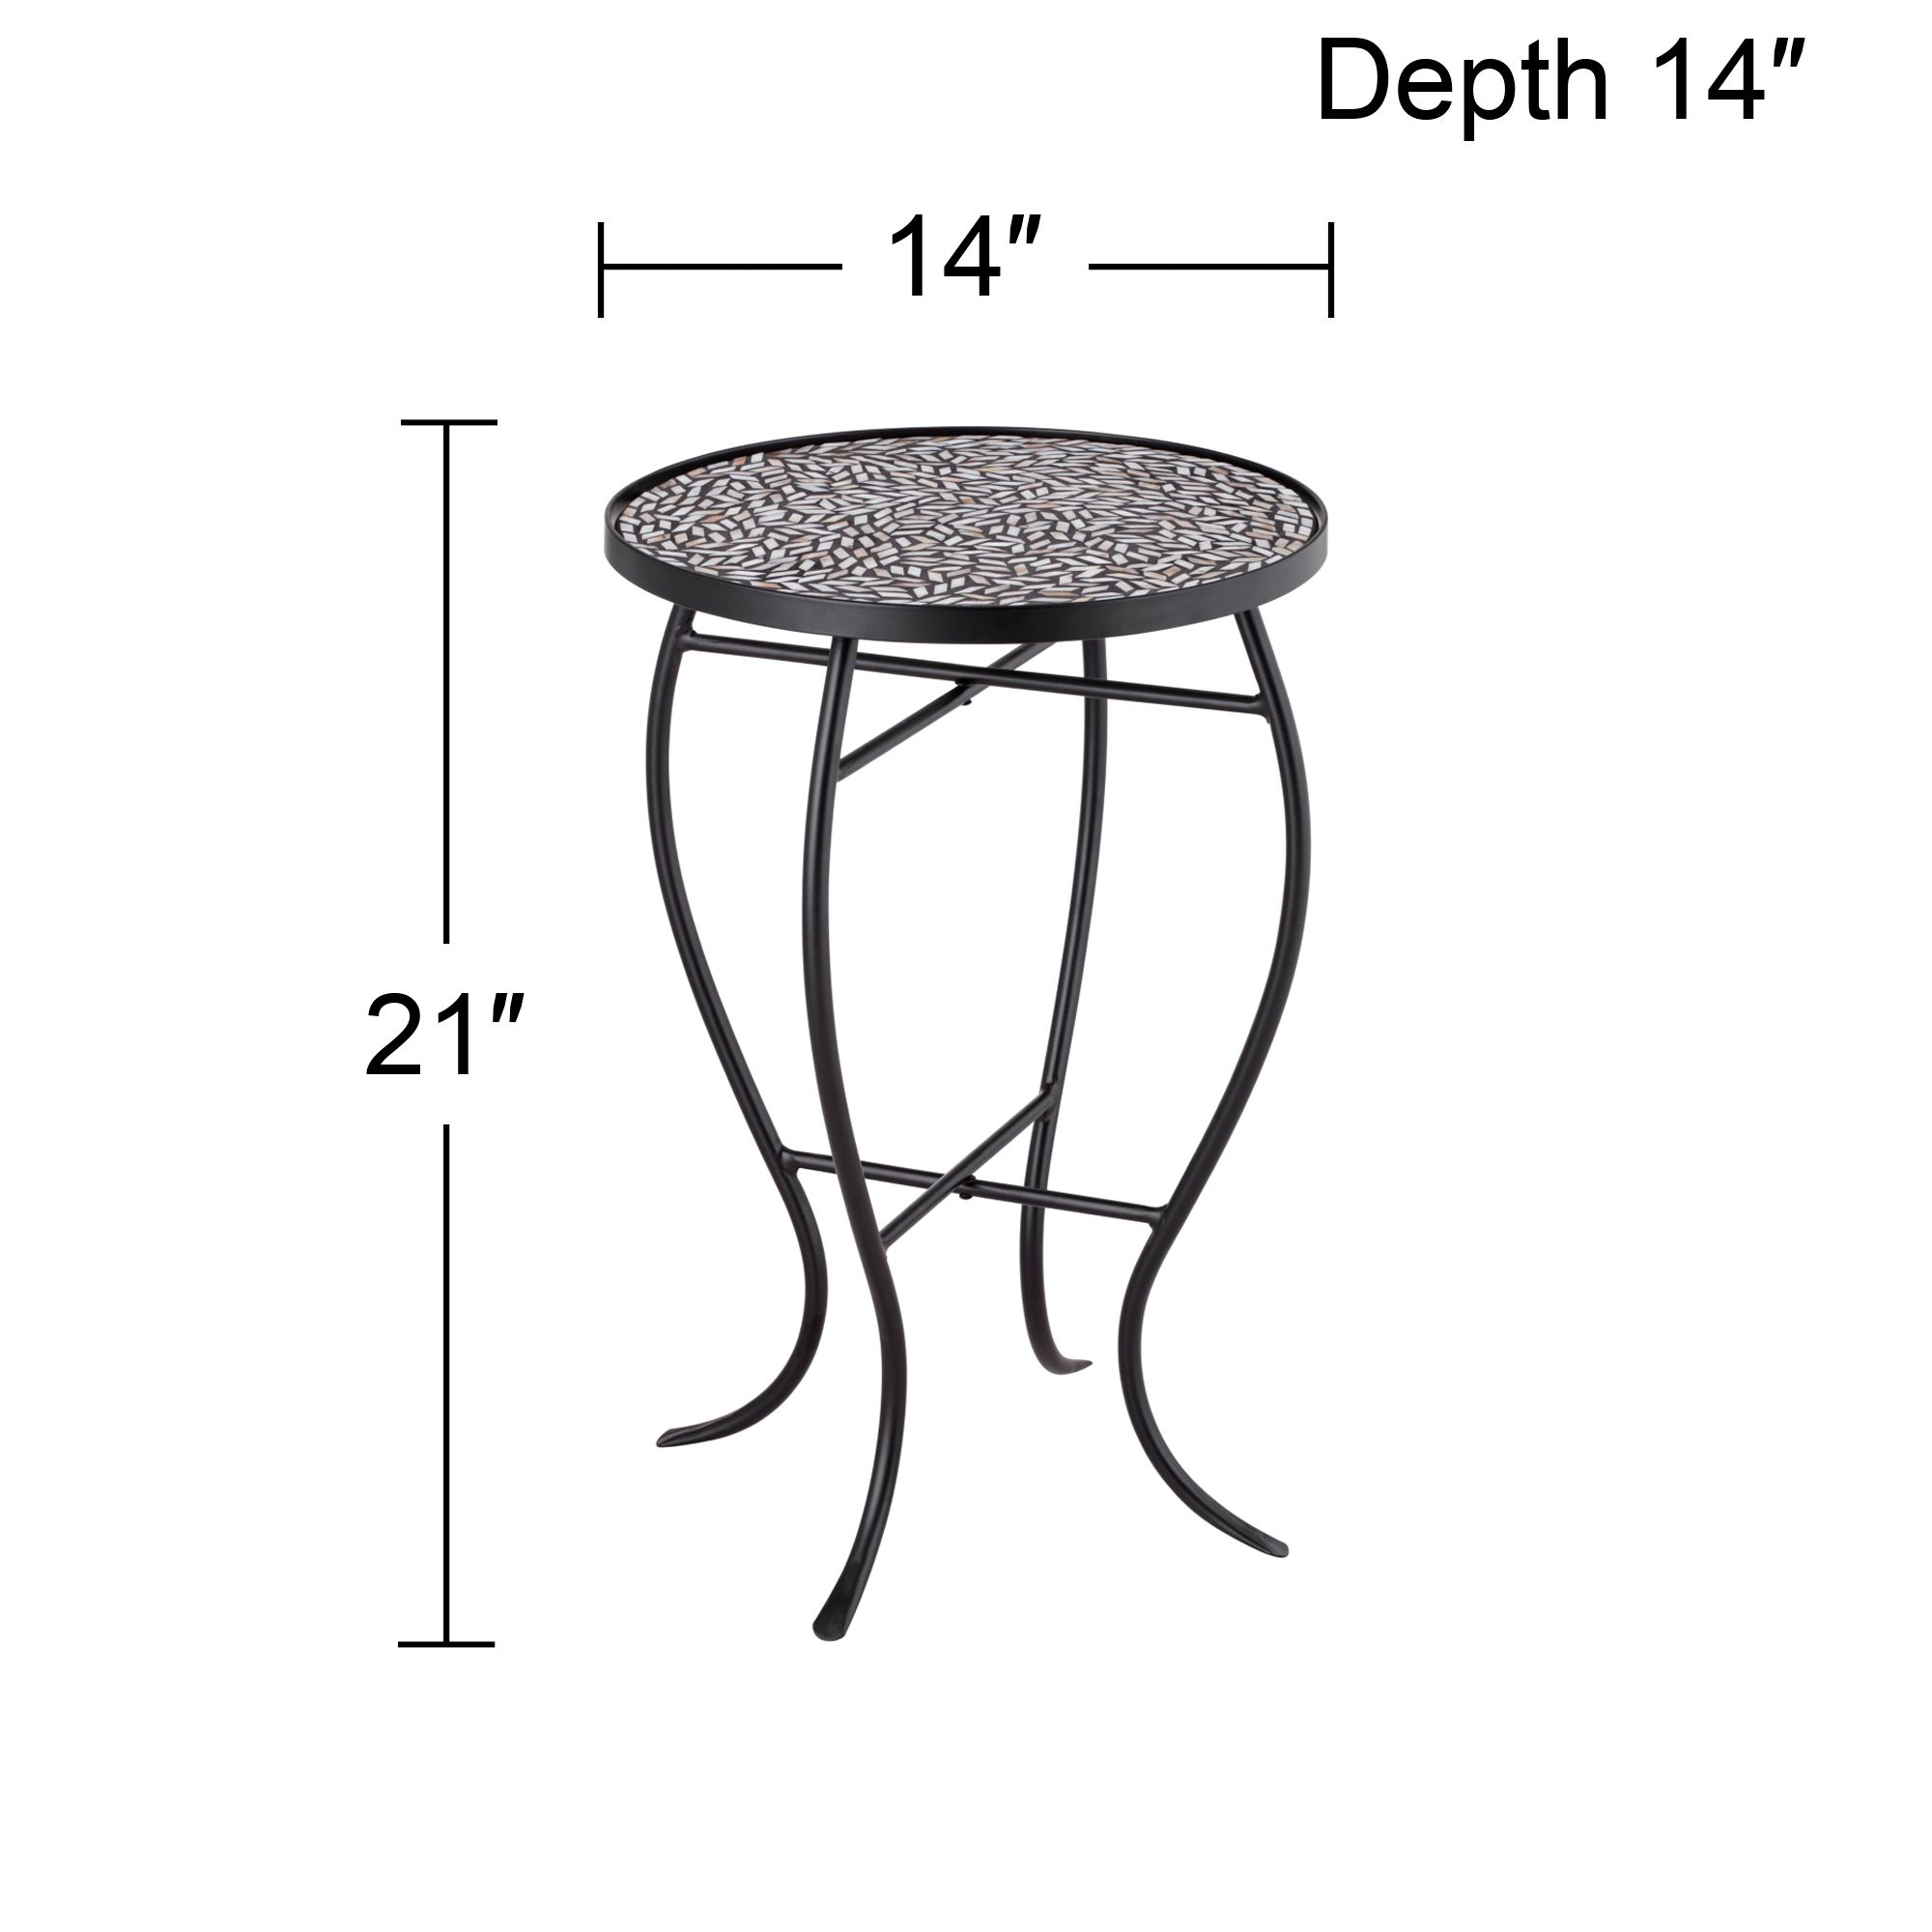 Teal Island Designs Modern Black Round Outdoor Accent Side Table 14" Wide Free-Form Mosaic Tabletop for Front Porch Patio Home House Balcony - image 4 of 7